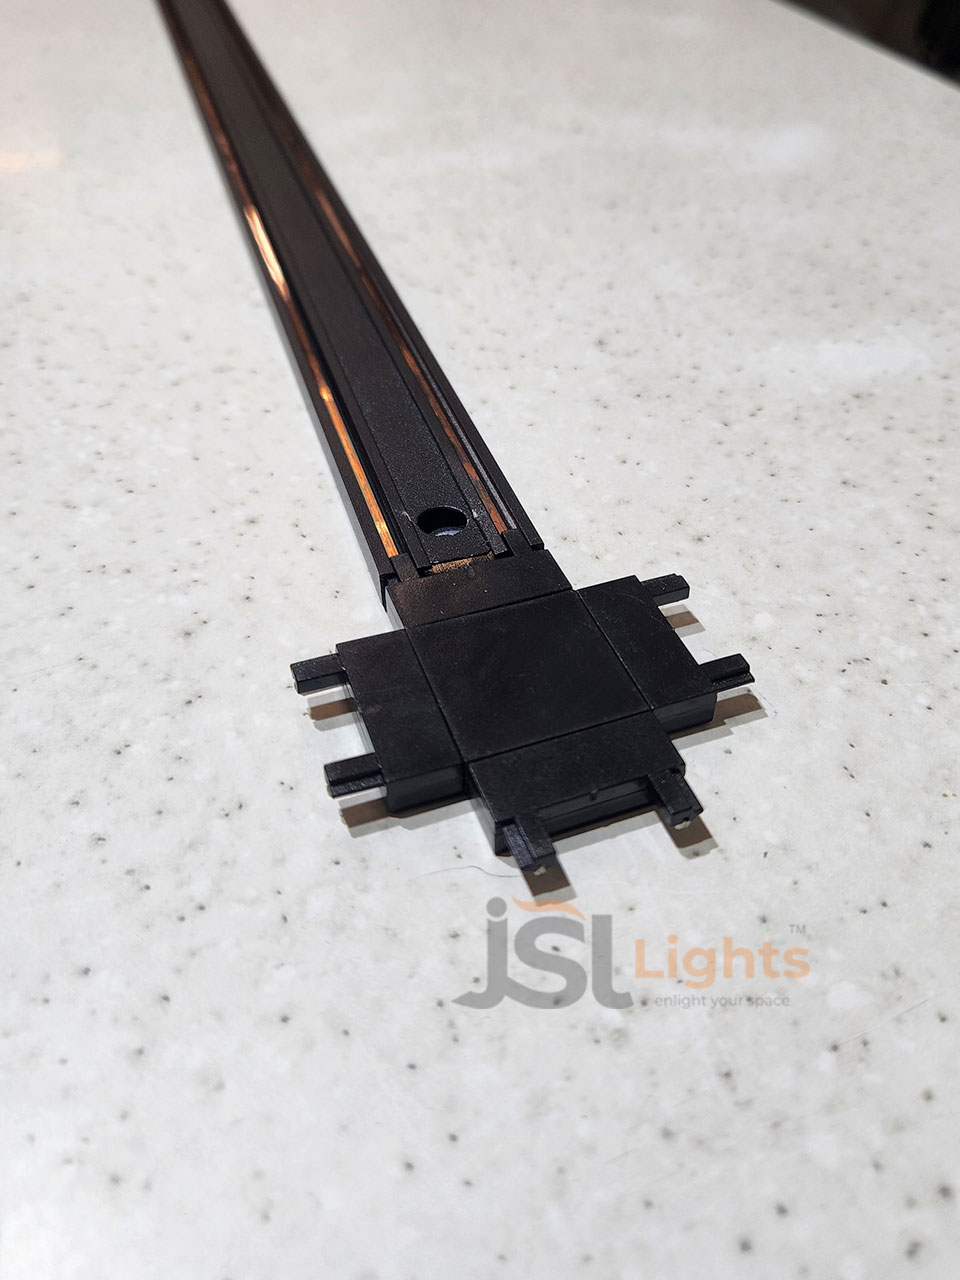 Slim Cross Magnetic Track Jointer MG TR01-5 Horizontal Surface MG 4 Way Jointer Connector for Ultra Thin Magnetic Track